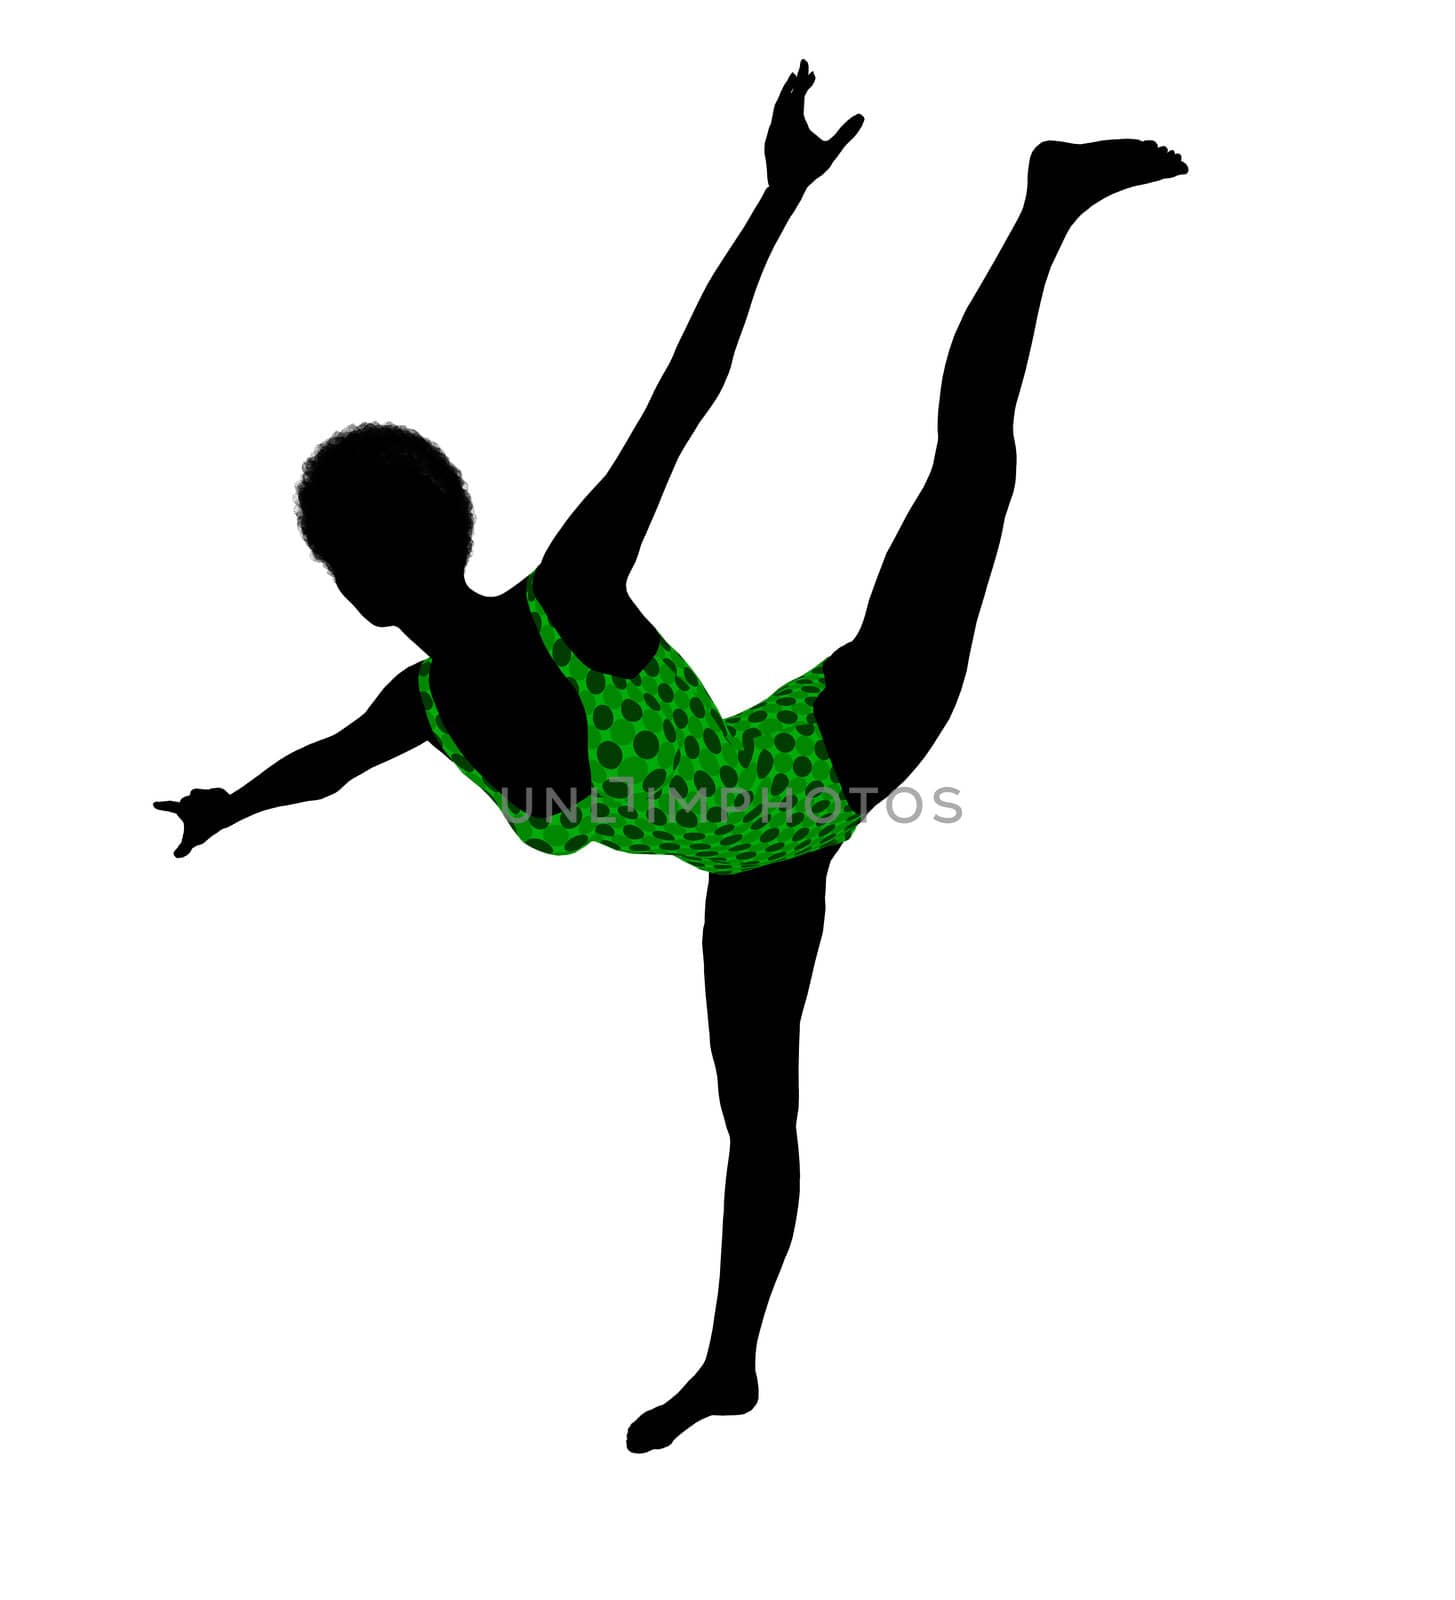 Female african American yoga art illustration silhouette on a white background